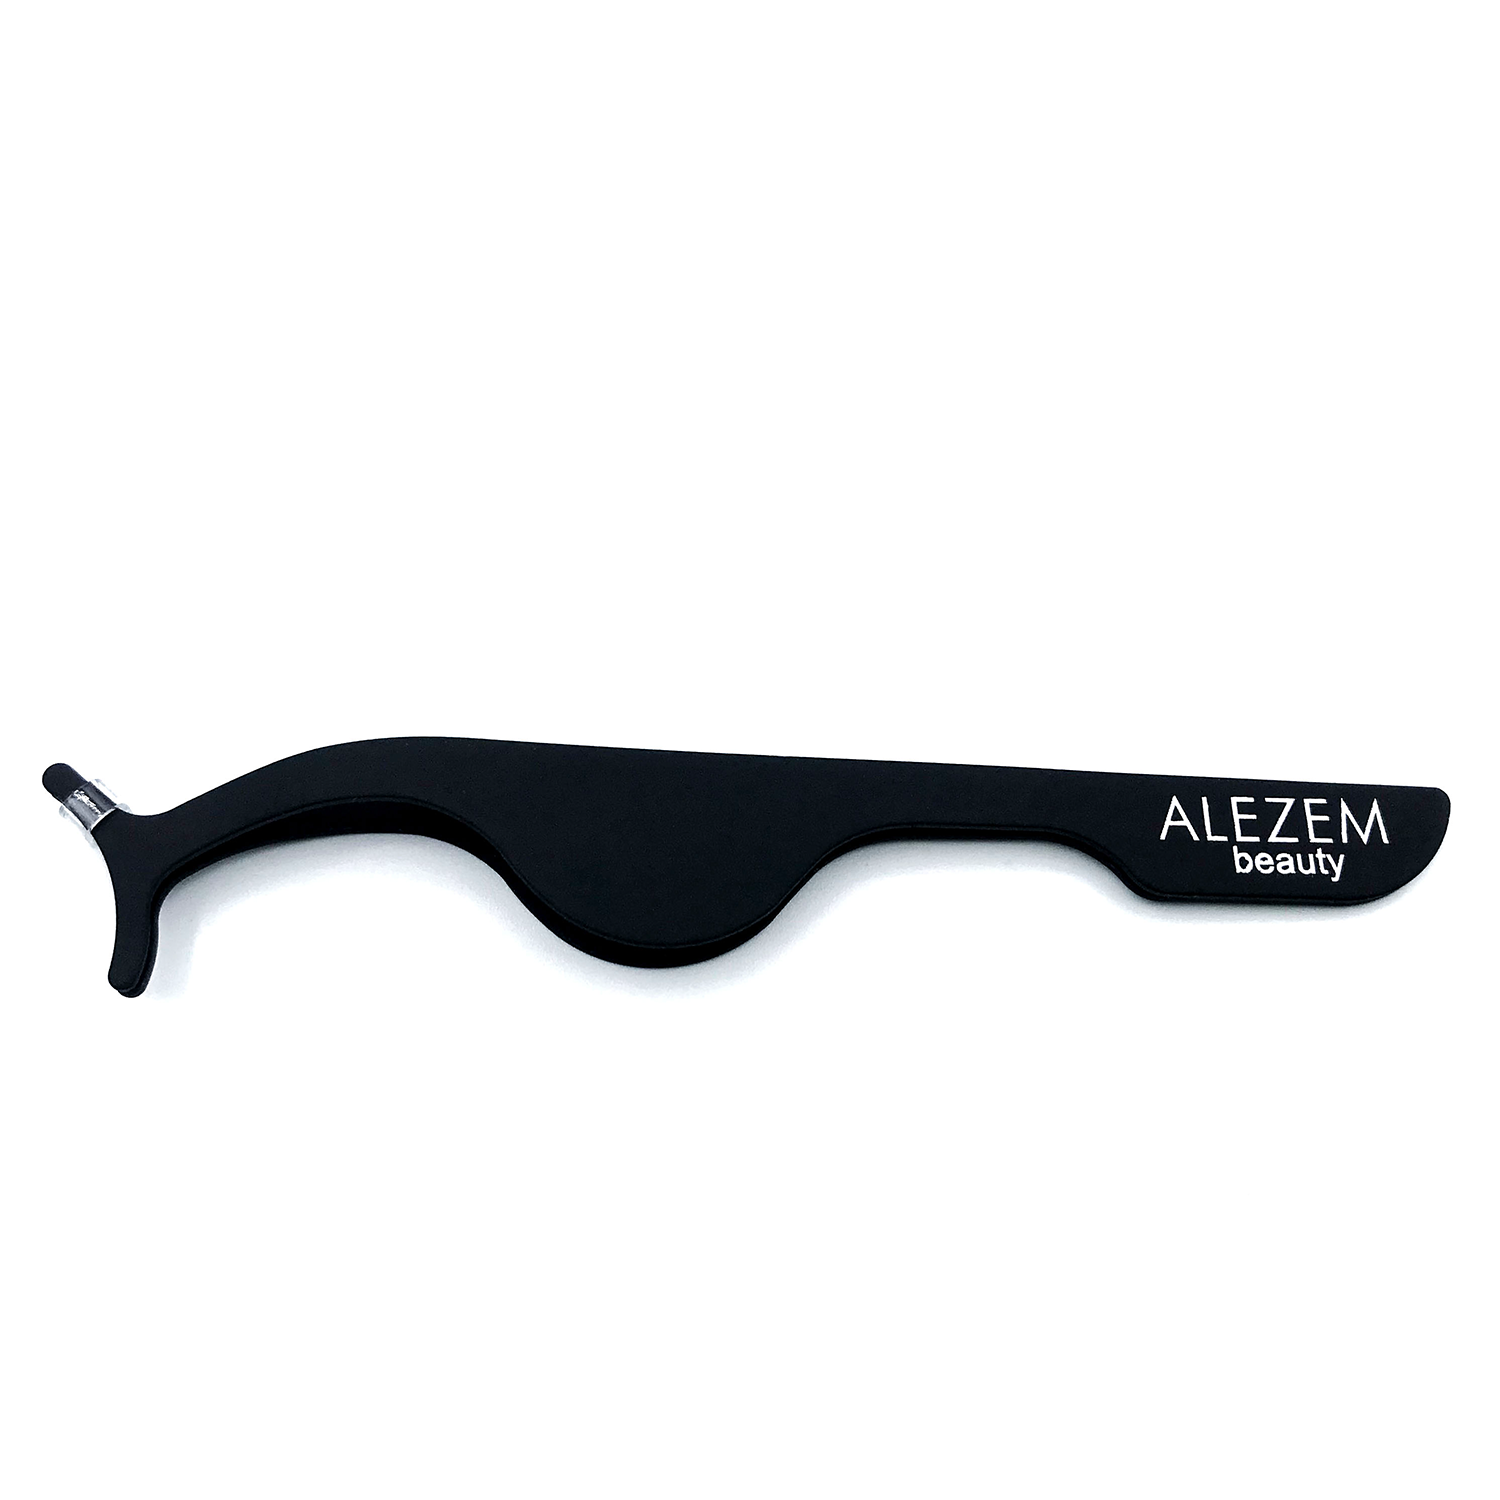 Alezem Beauty eyelash applicator in gorgeous black color, best tool for your eyelashes. apply lashes with alezem beauty lash applicator best brand of cosmetics in Pakistan.